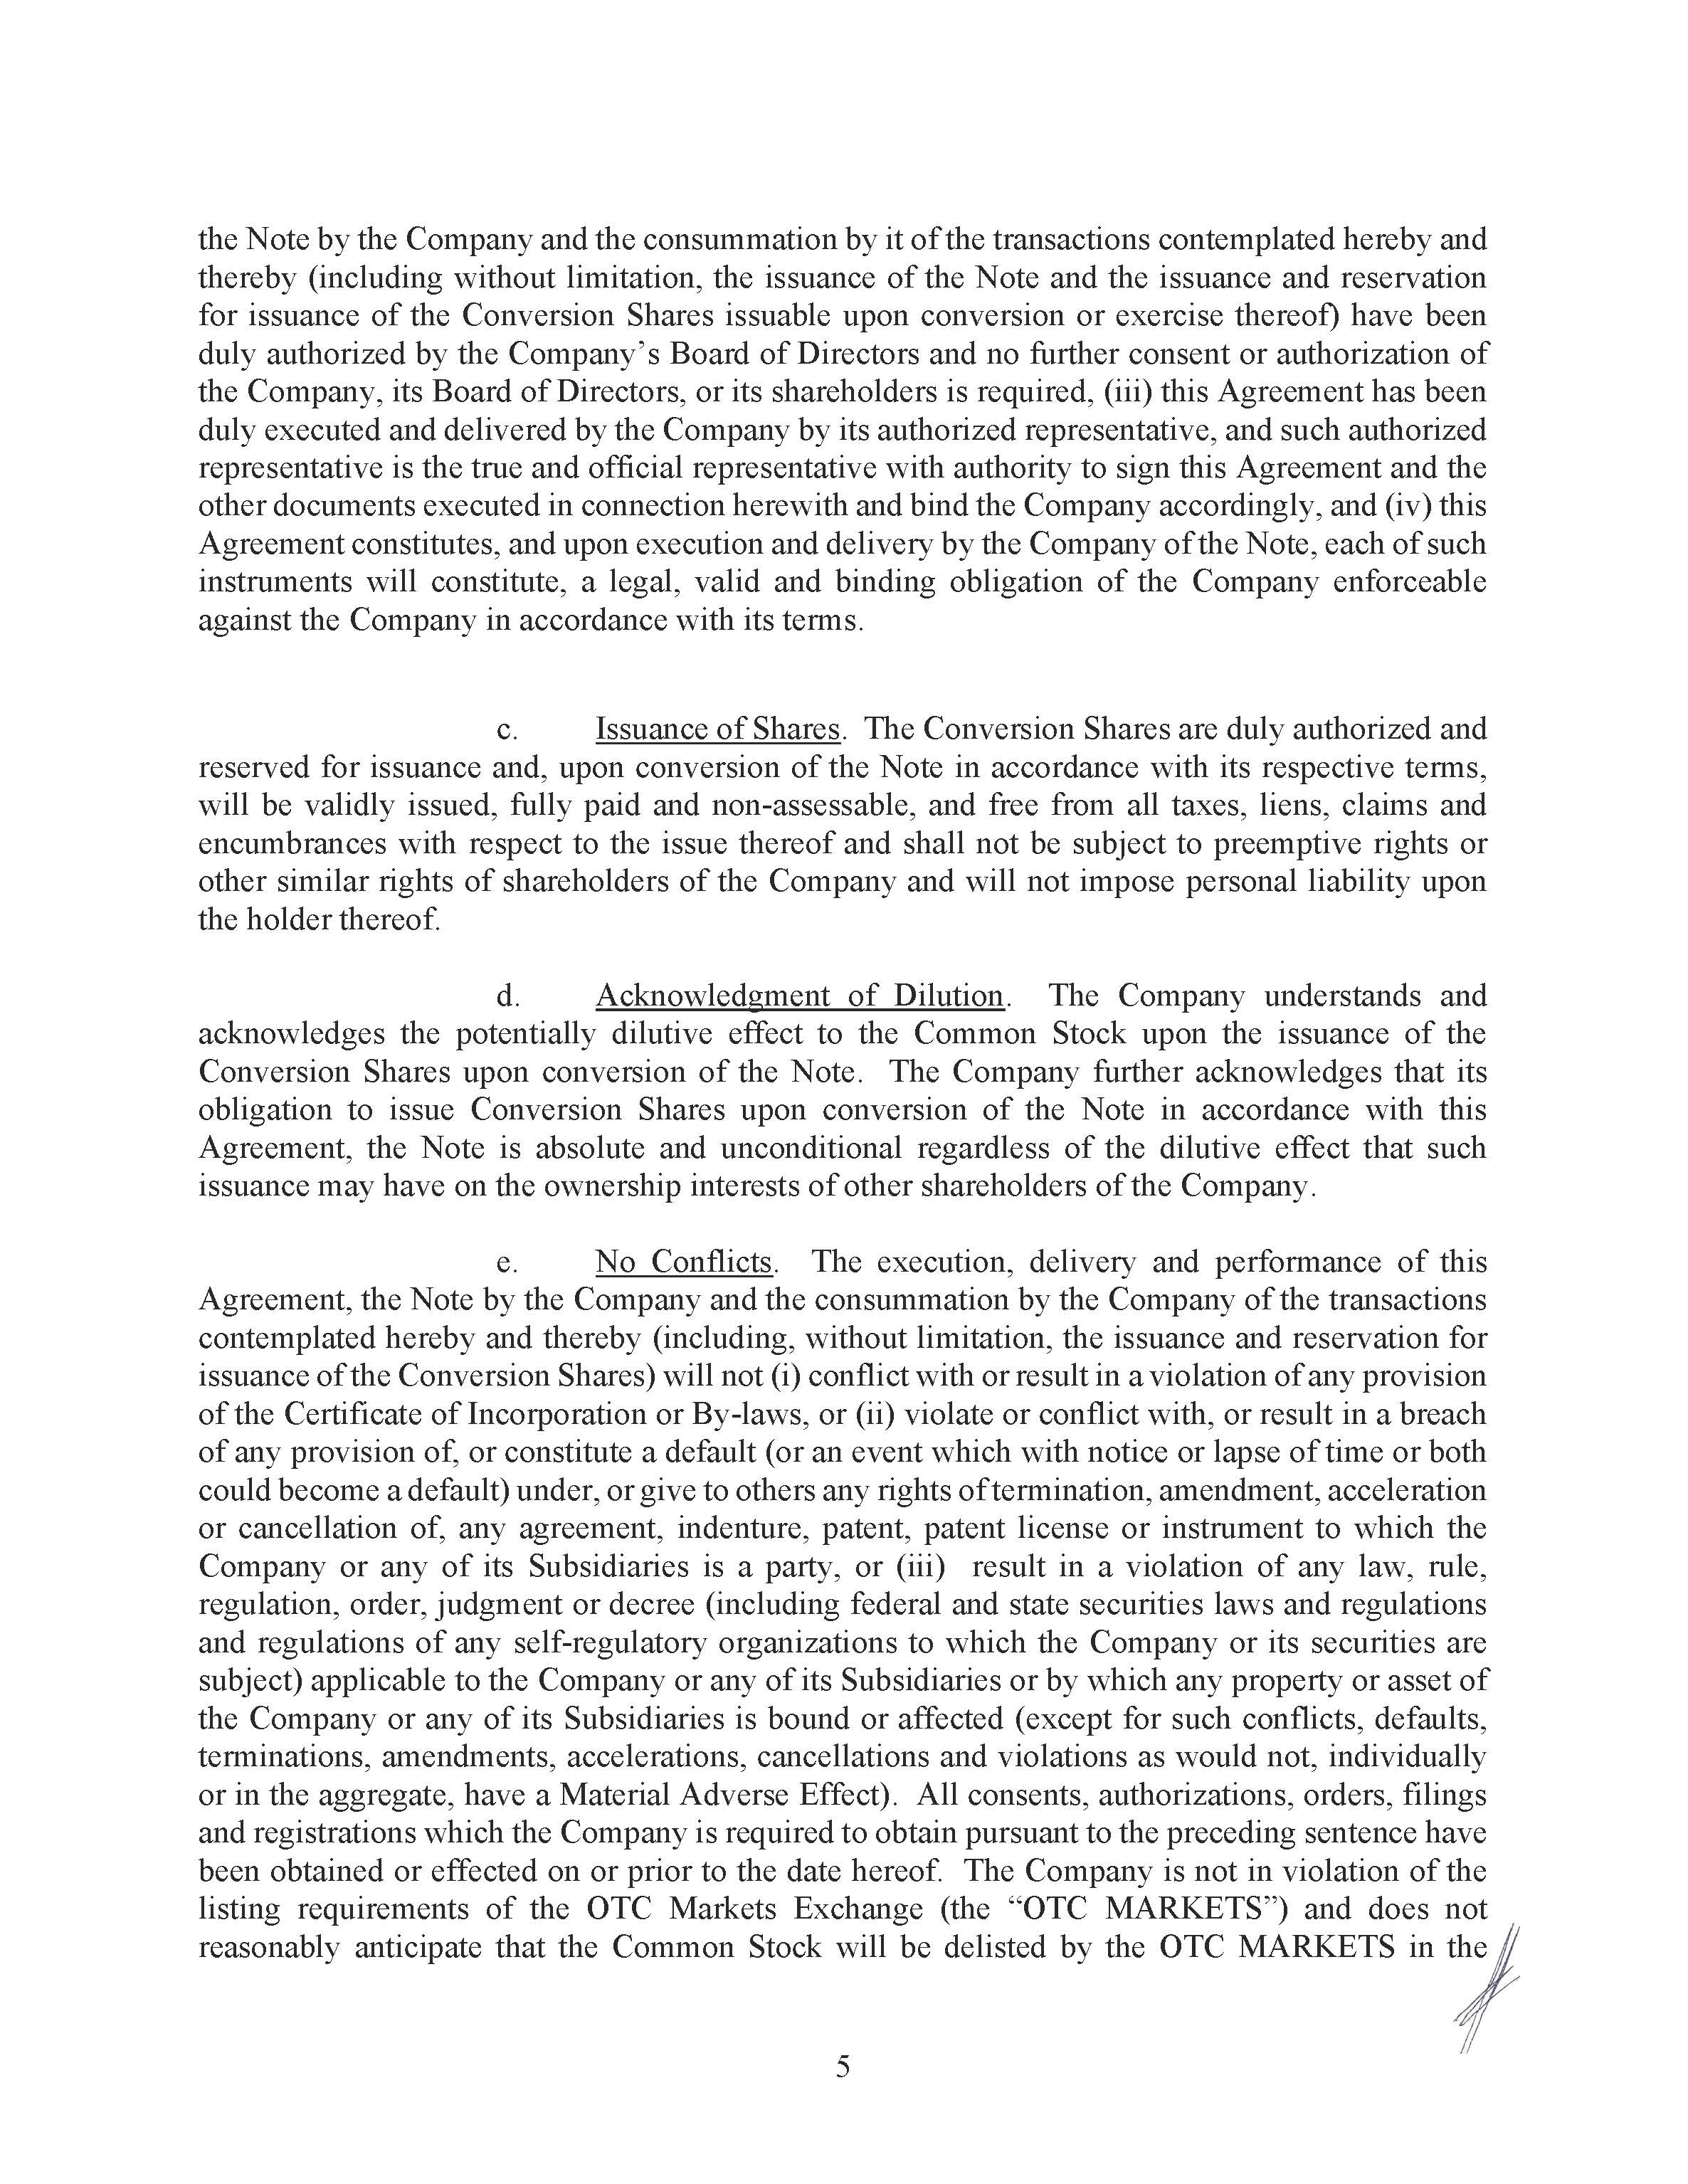 8K 052020 Purchase Agreement_Page_05.jpg